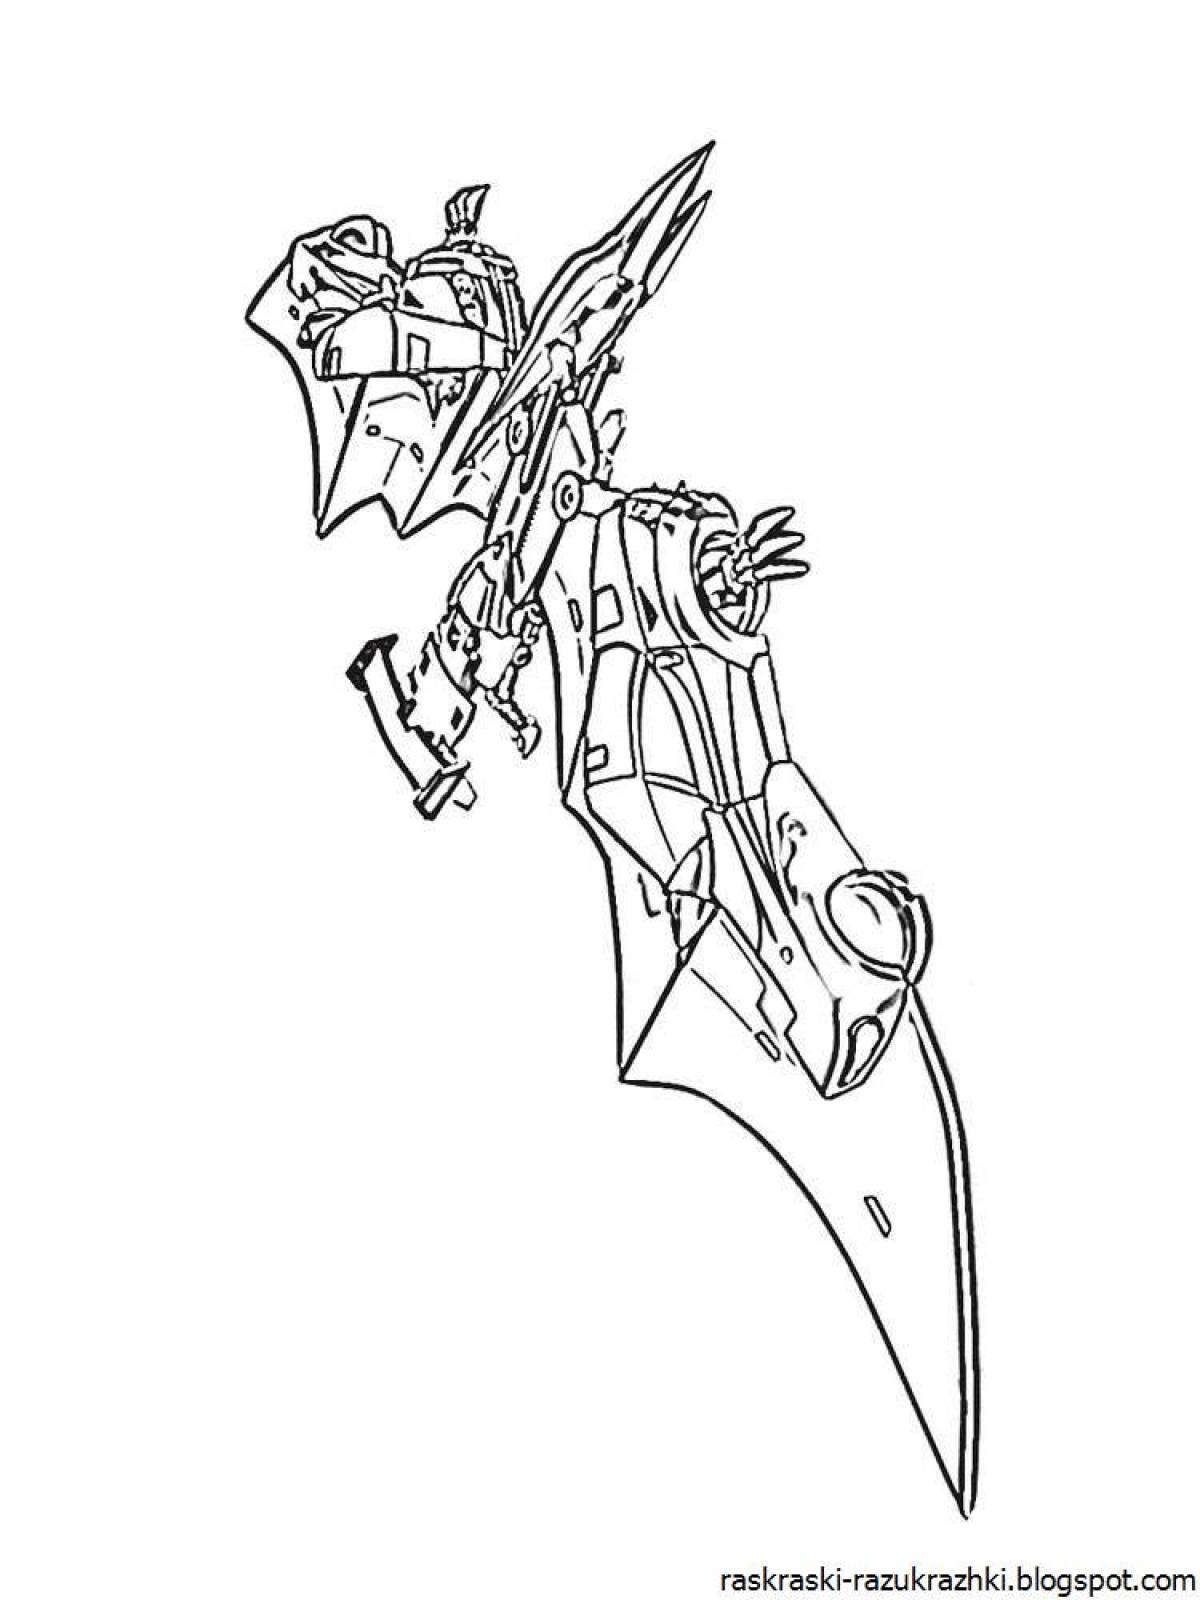 Amazing screamers coloring page